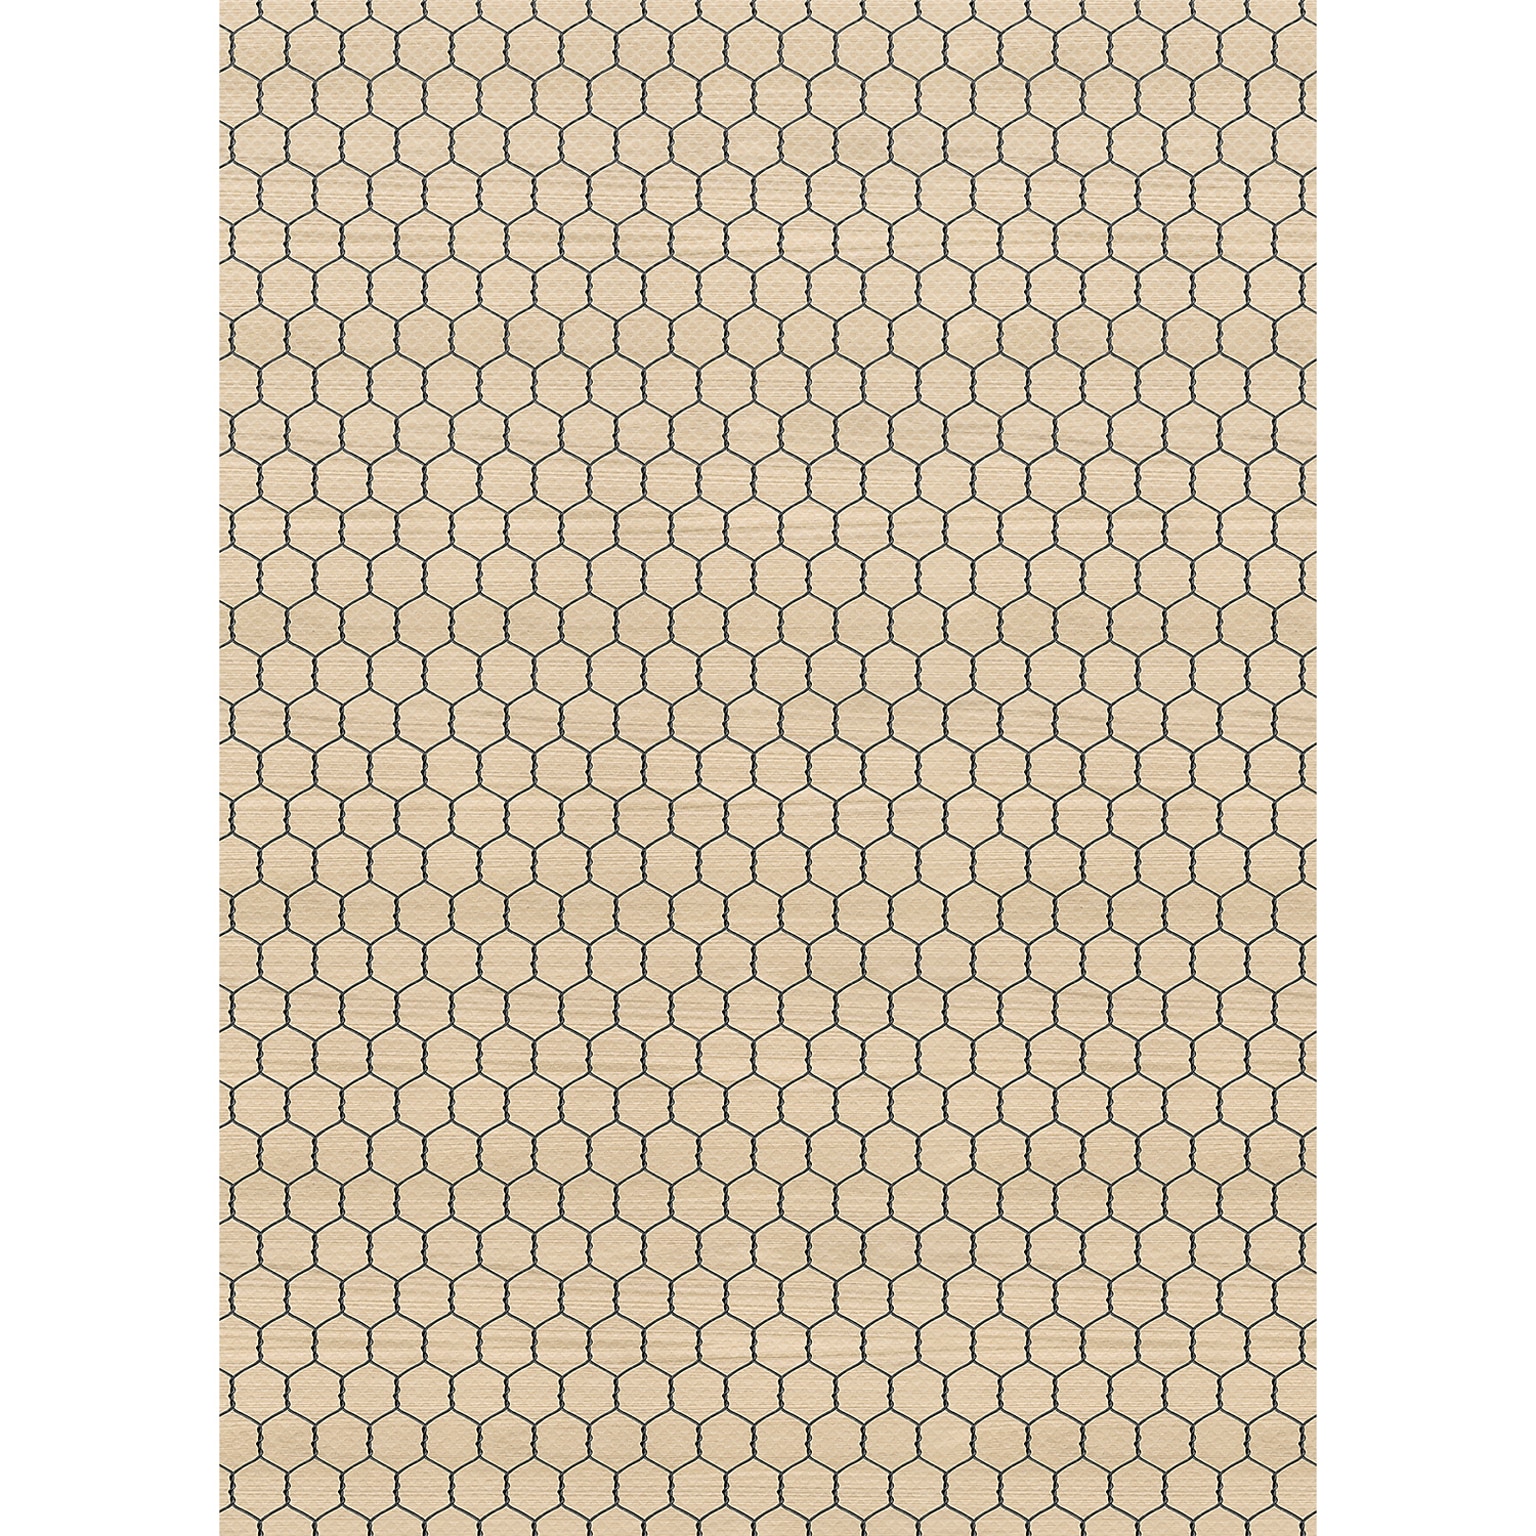 Teacher Created Resources Better Than Paper Bulletin Board Paper Roll, Chicken Wire, 4-Pack (TCR32358)